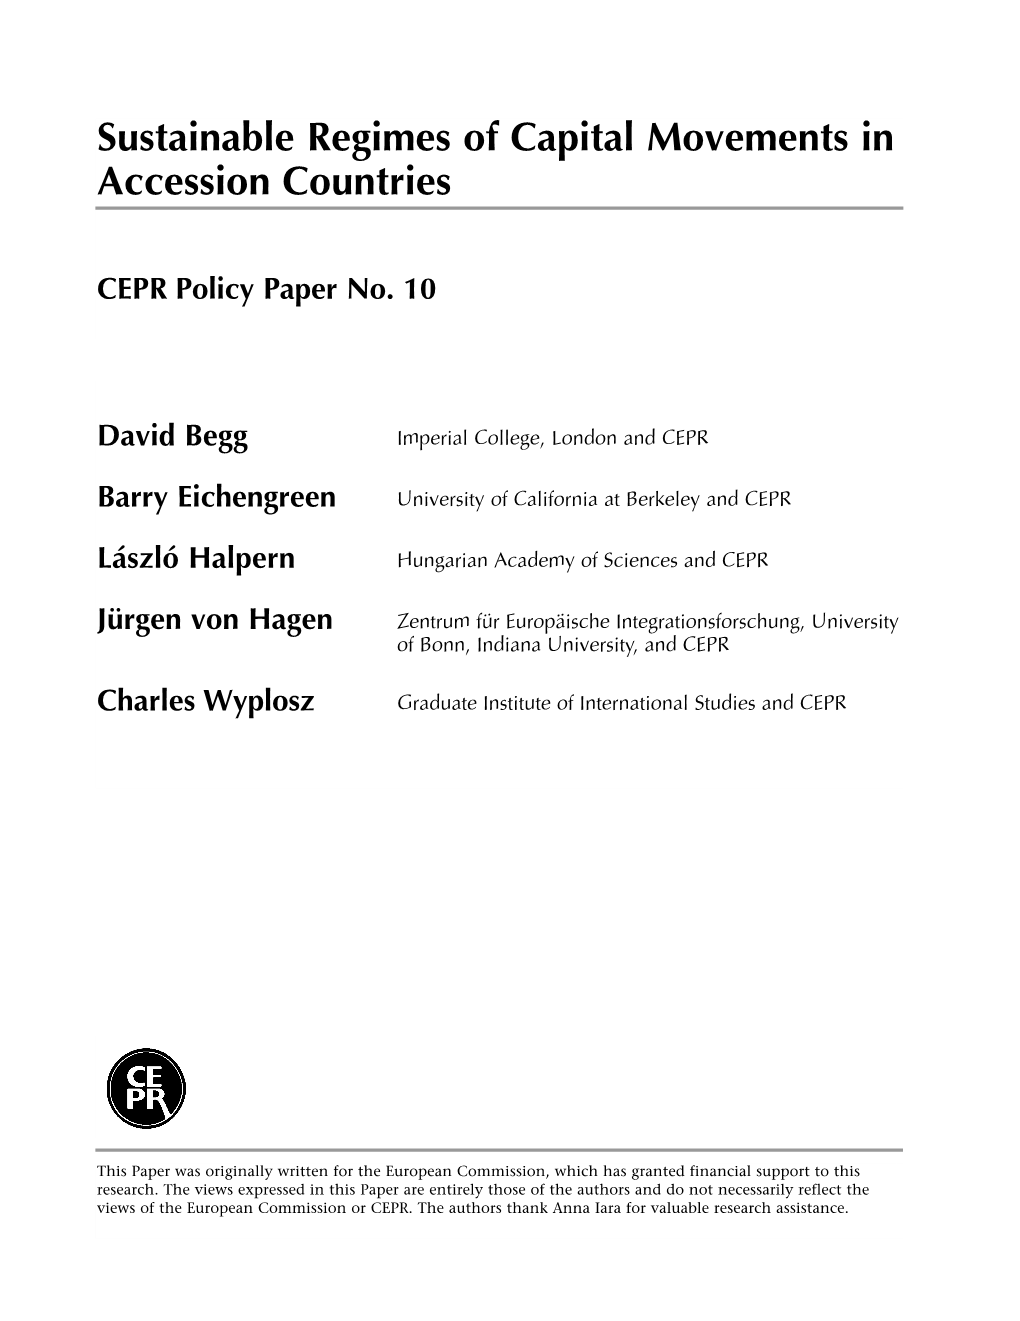 Sustainable Regimes of Capital Movements in Accession Countries